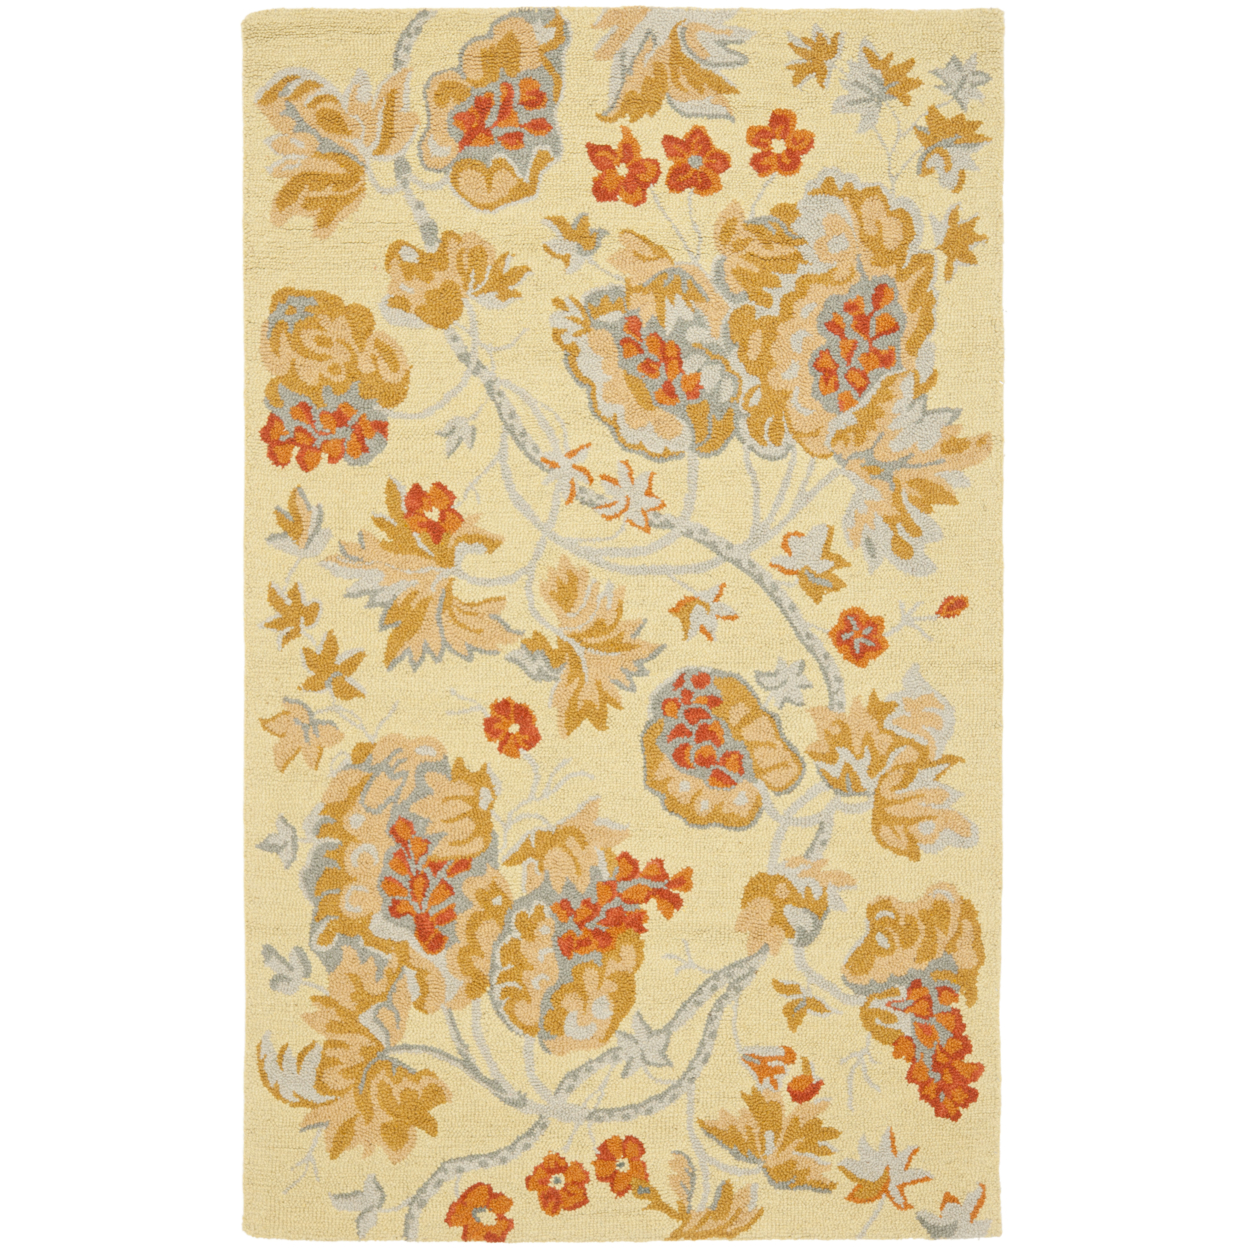 SAFAVIEH Blossom BLM922A Hand-hooked Beige / Multi Rug - 5' X 8'